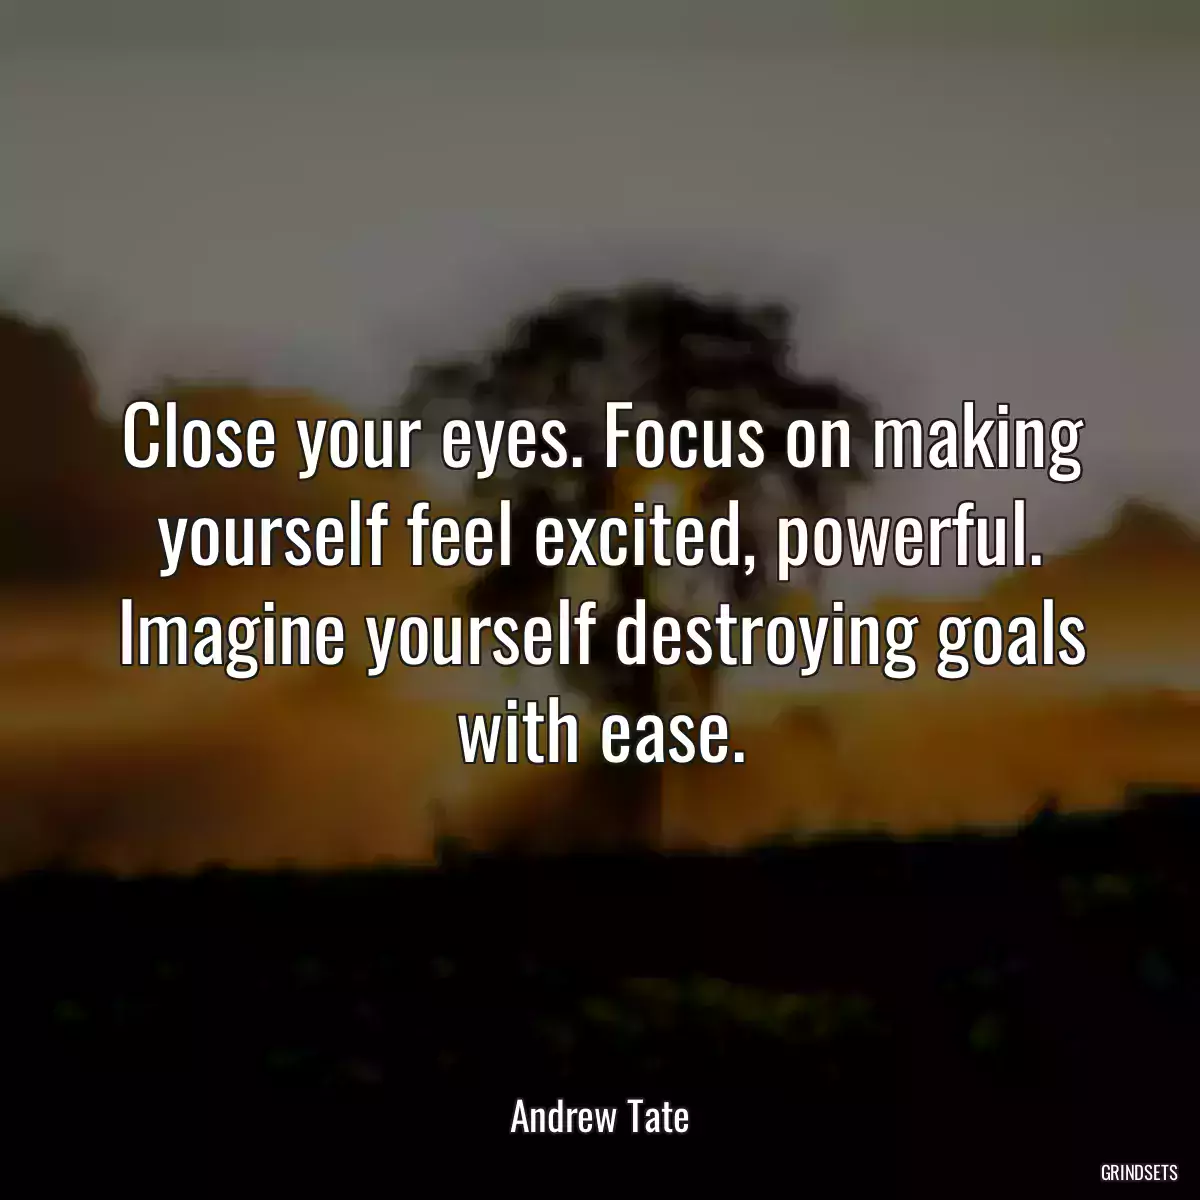 Close your eyes. Focus on making yourself feel excited, powerful. Imagine yourself destroying goals with ease.